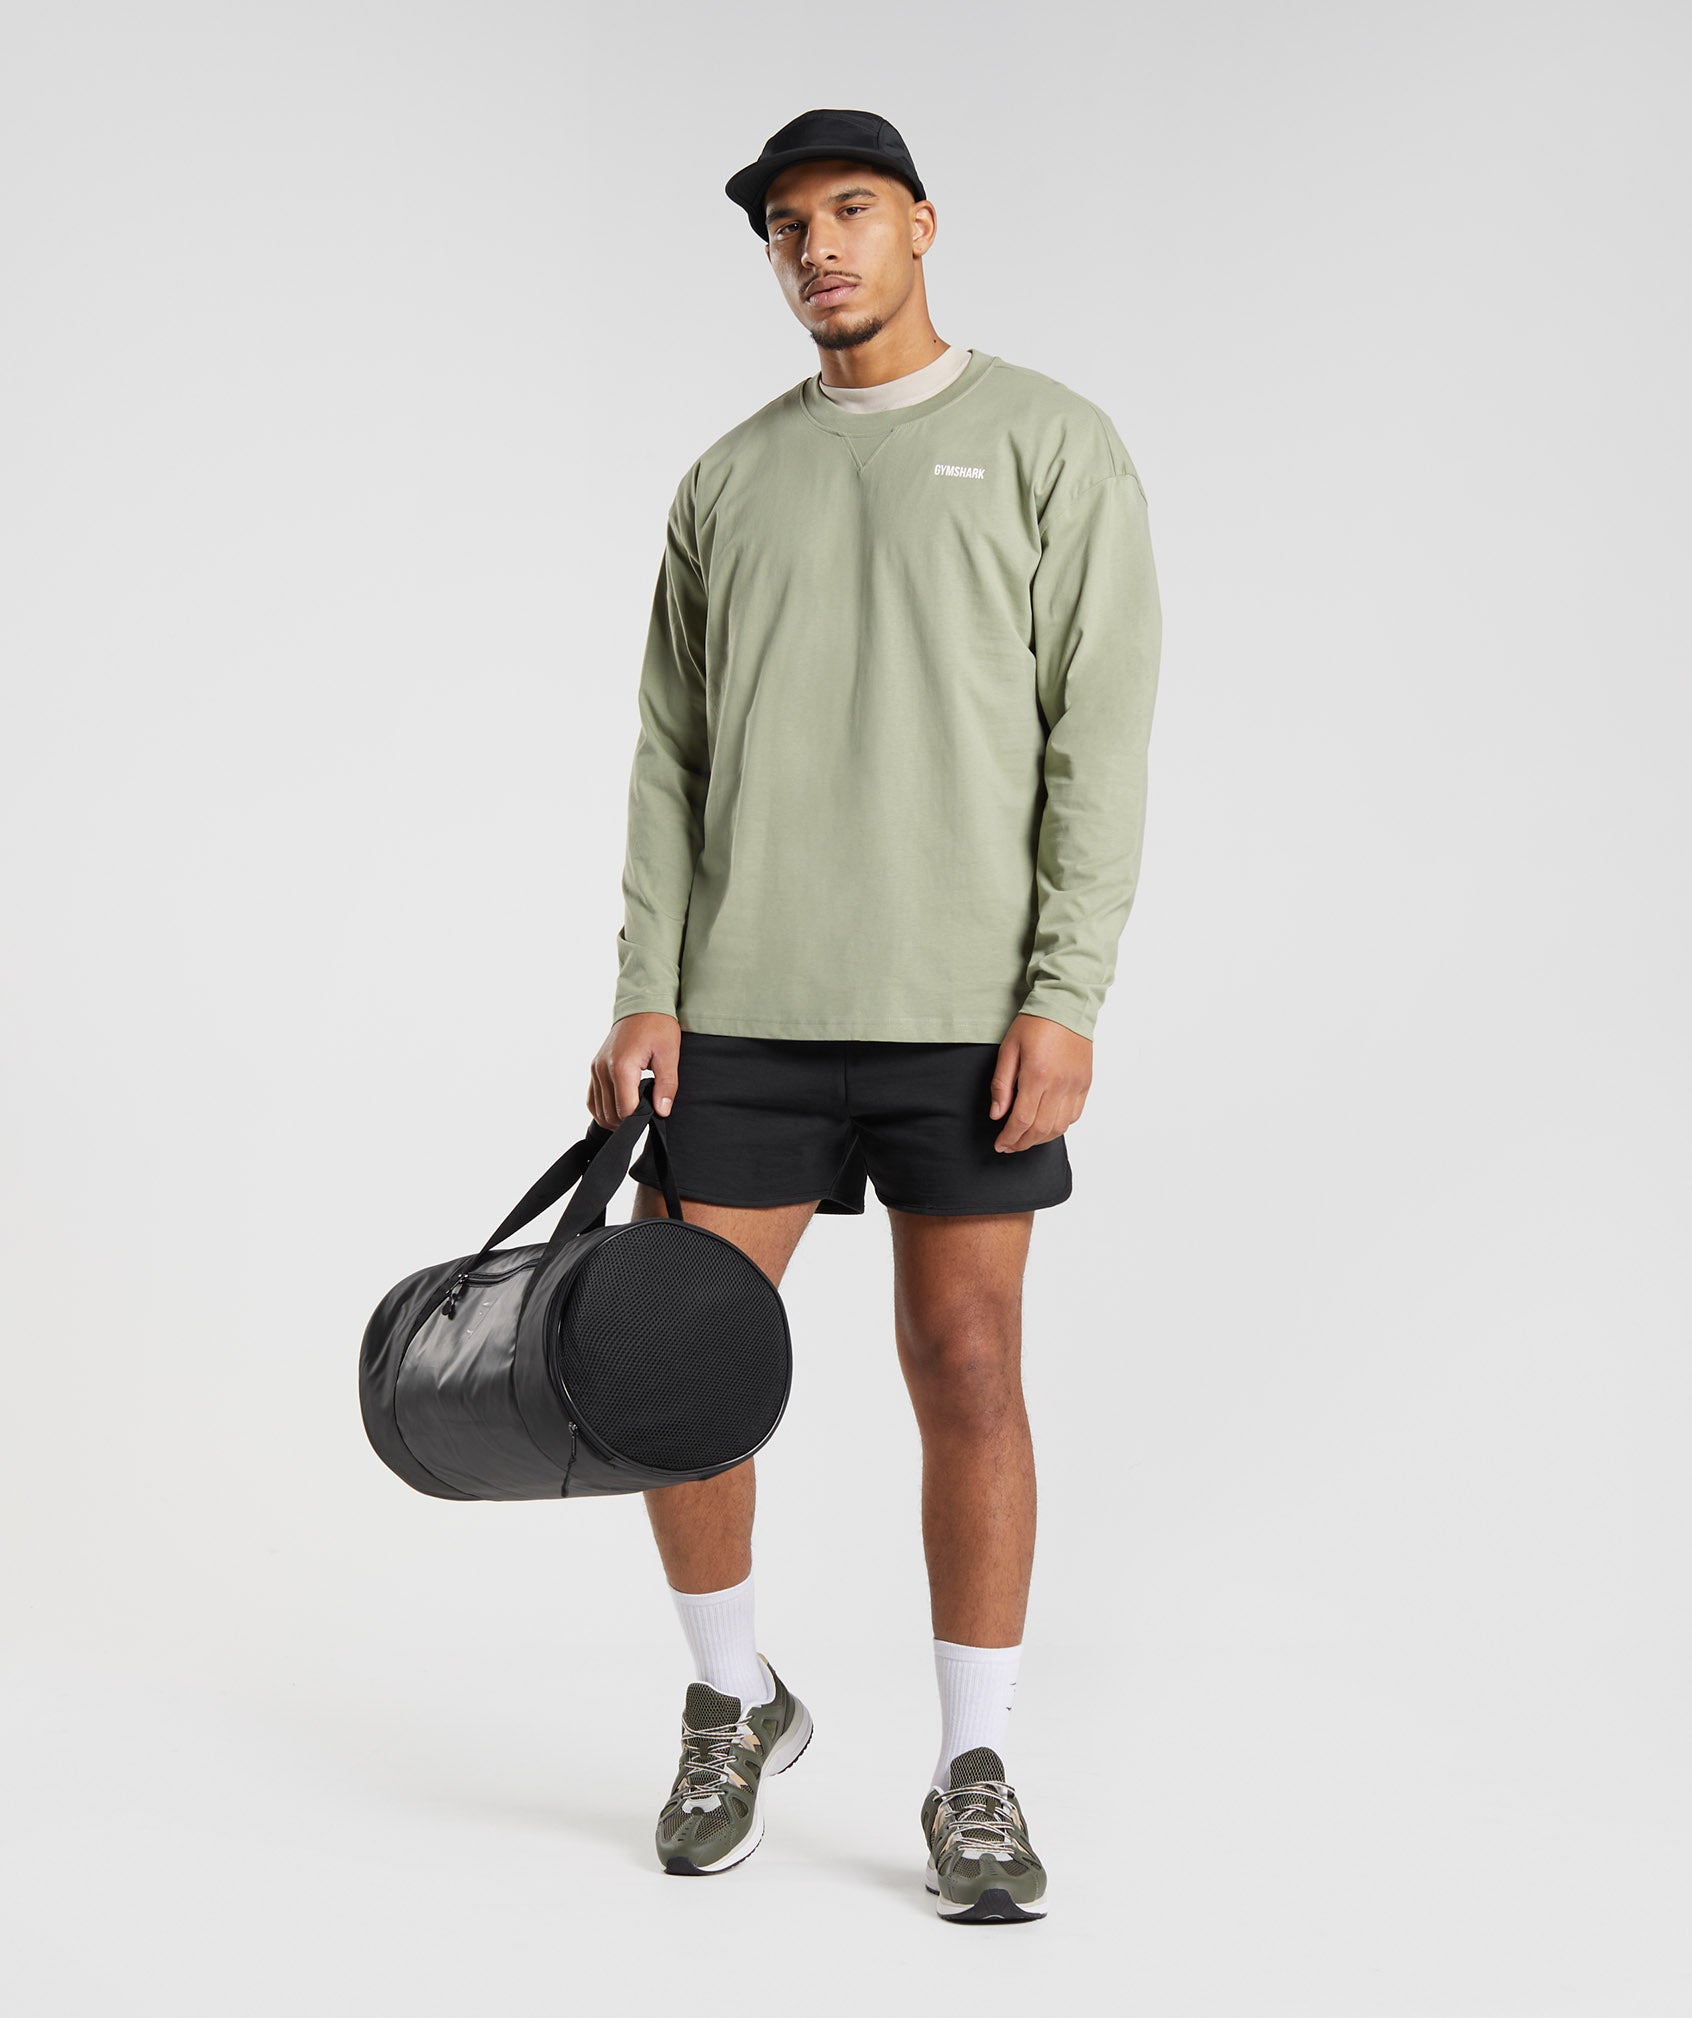 Rest Day Sweats Long Sleeve T-Shirt in Sage Green - view 5